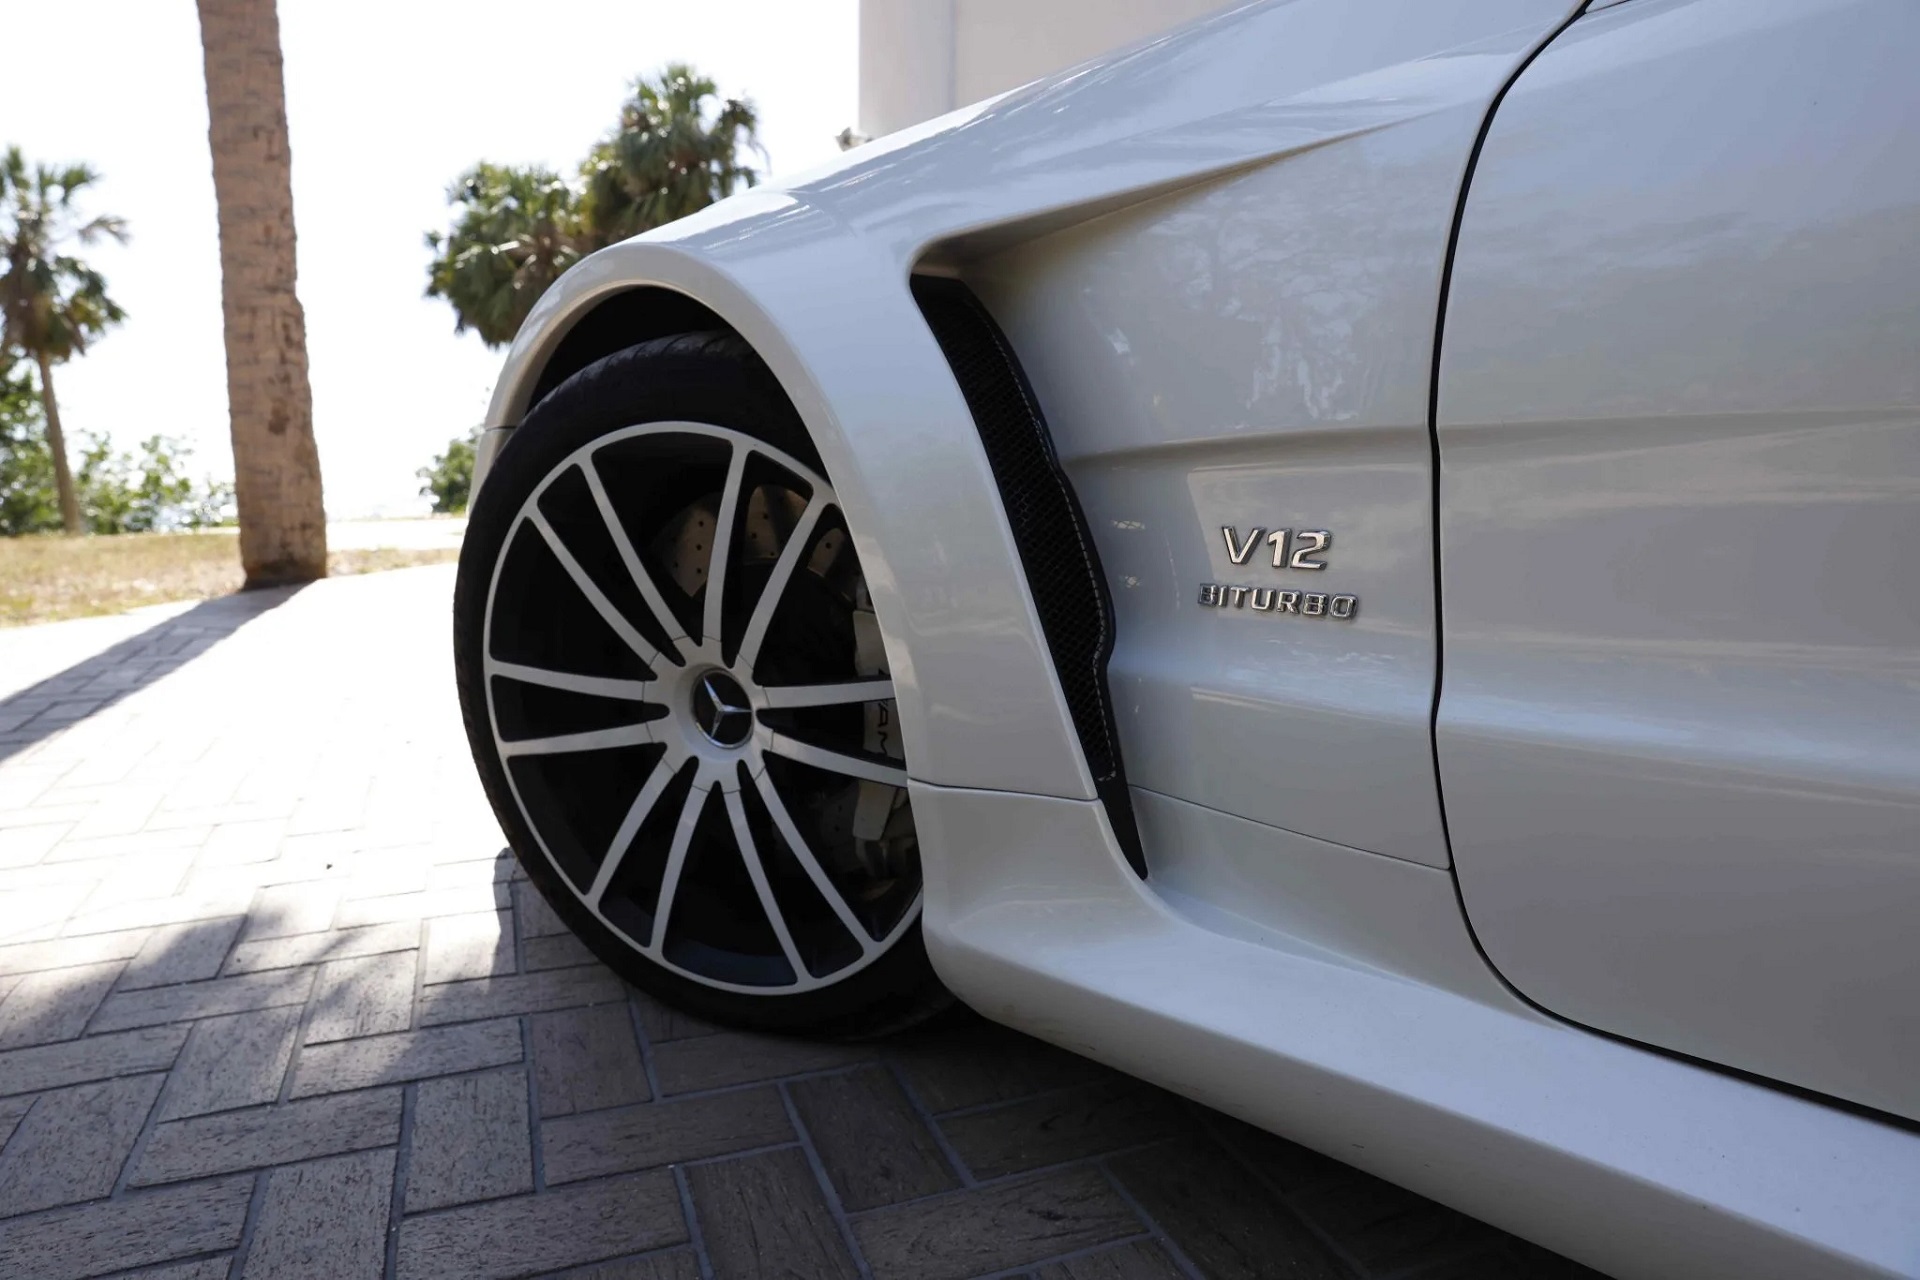 image showing the enlarged front fender and wheel of a white 2009 mercedes benz sl65 amg black series